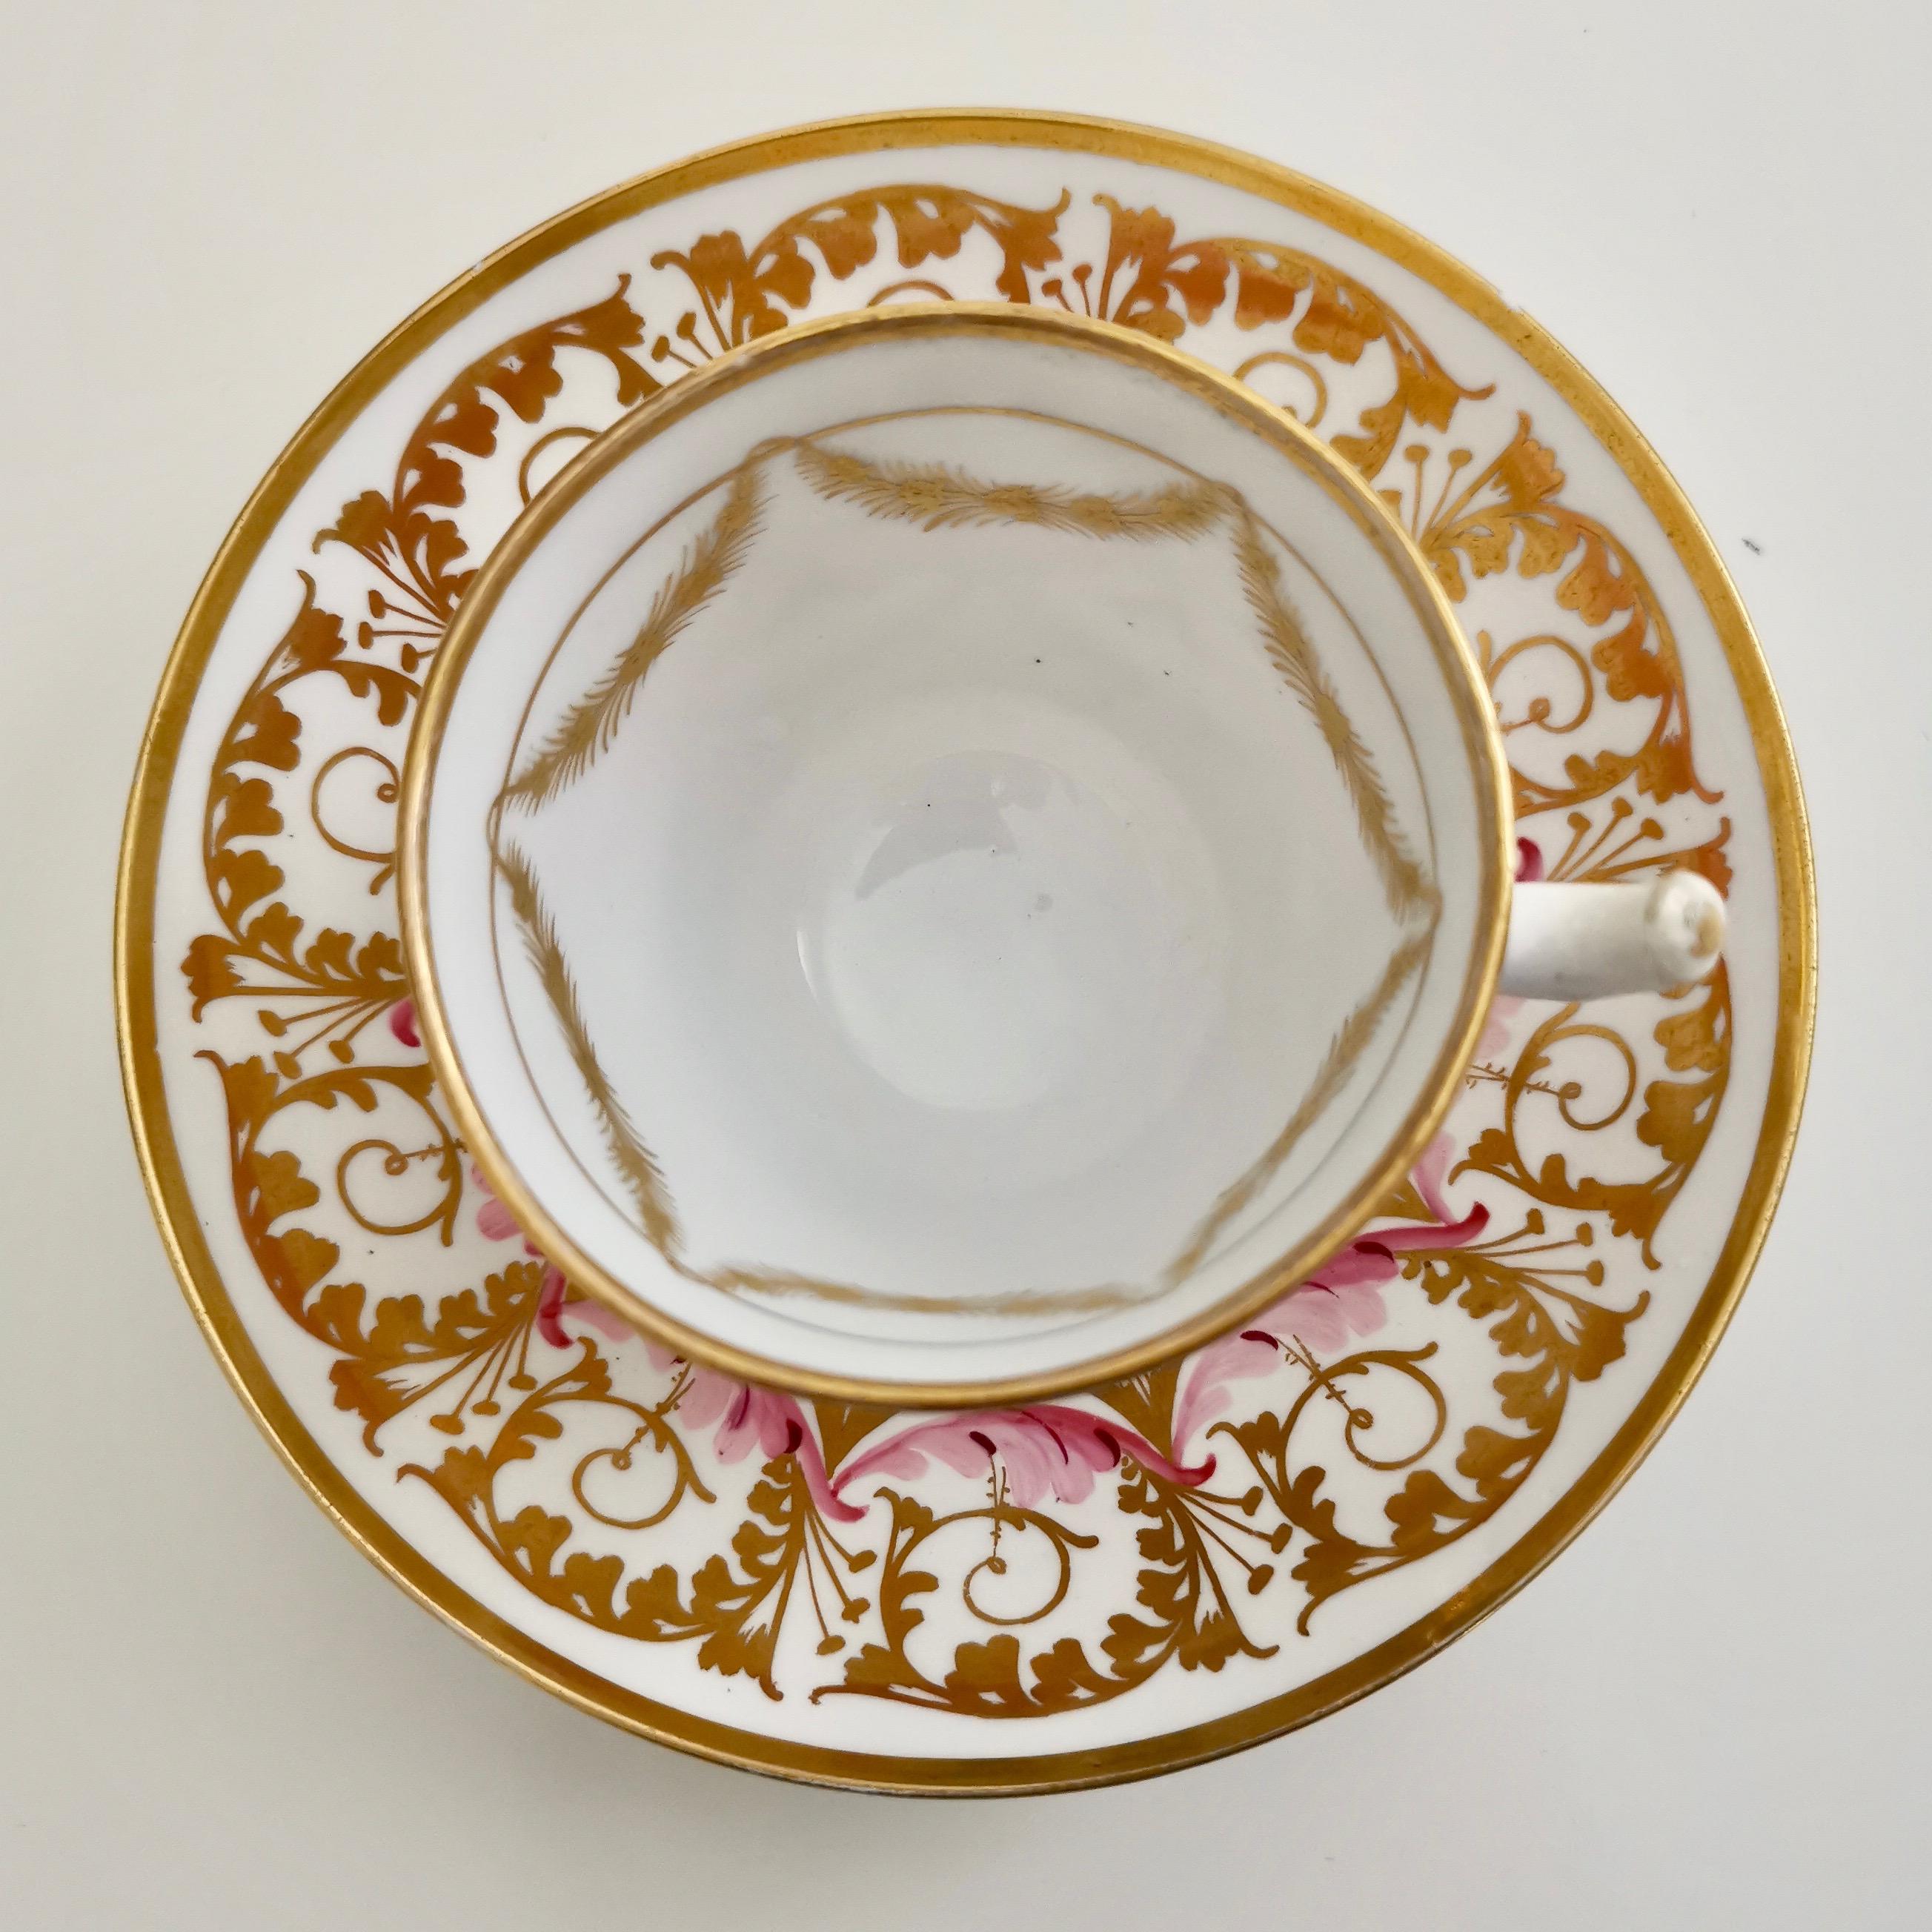 Hand-Painted New Hall Cup and Saucer, Gilt and Pink Sprigs, Regency, 1815-1820